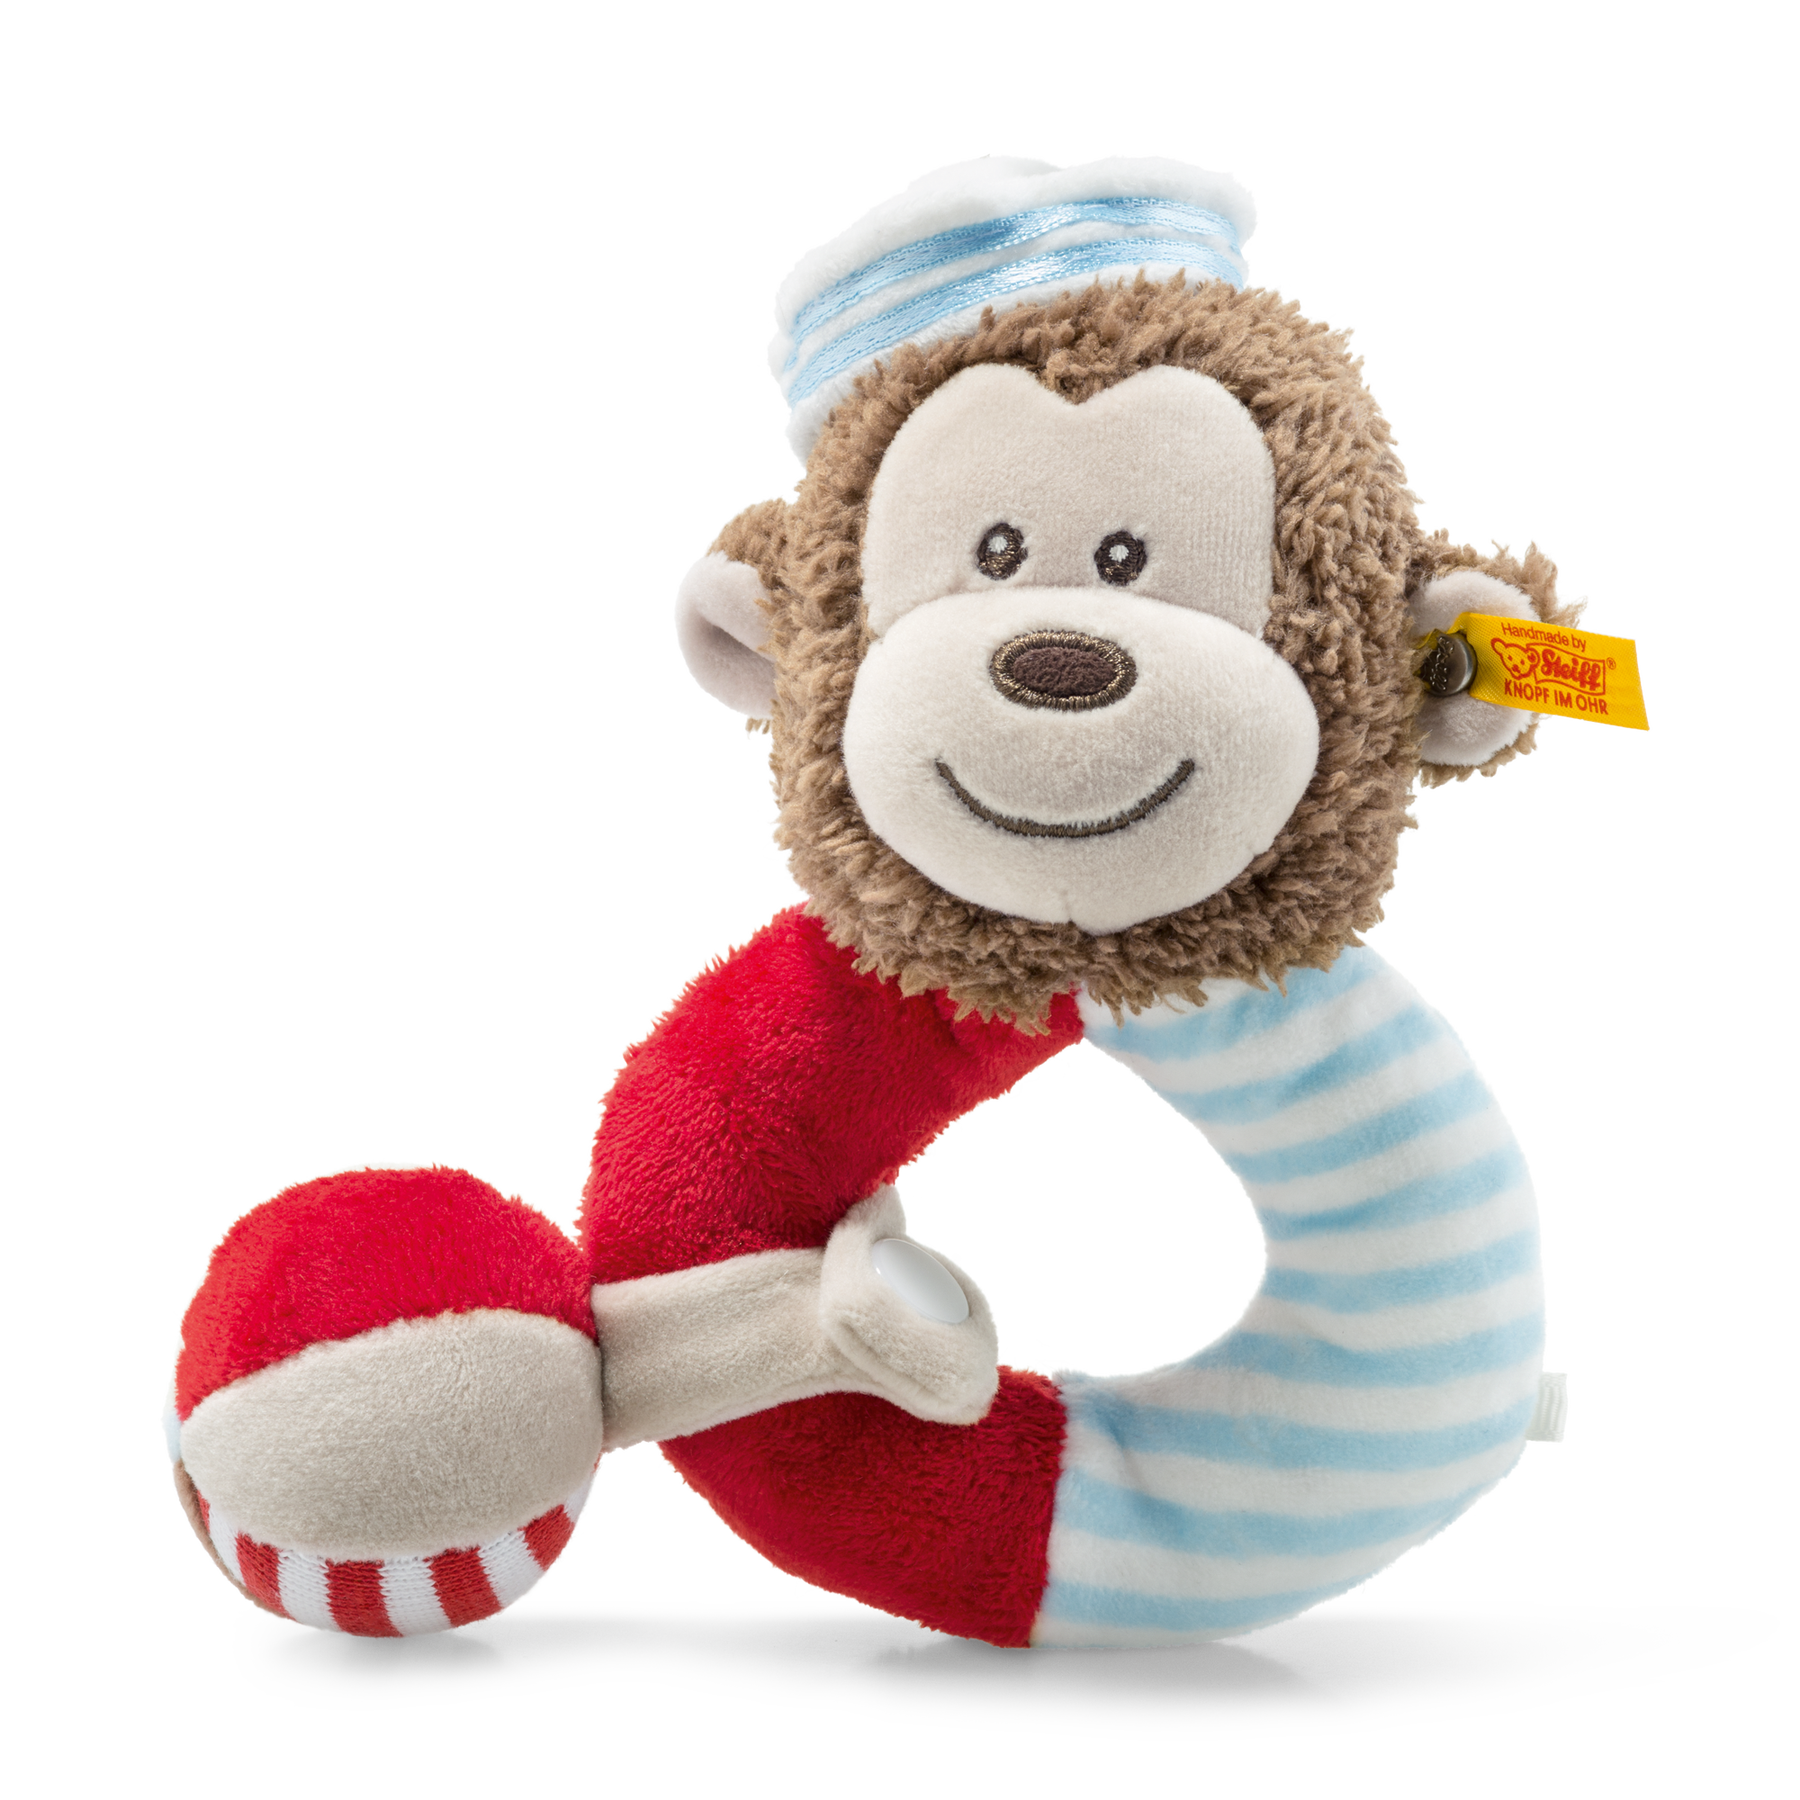 Down by the Sea Sailor monkey grip toy with rattle